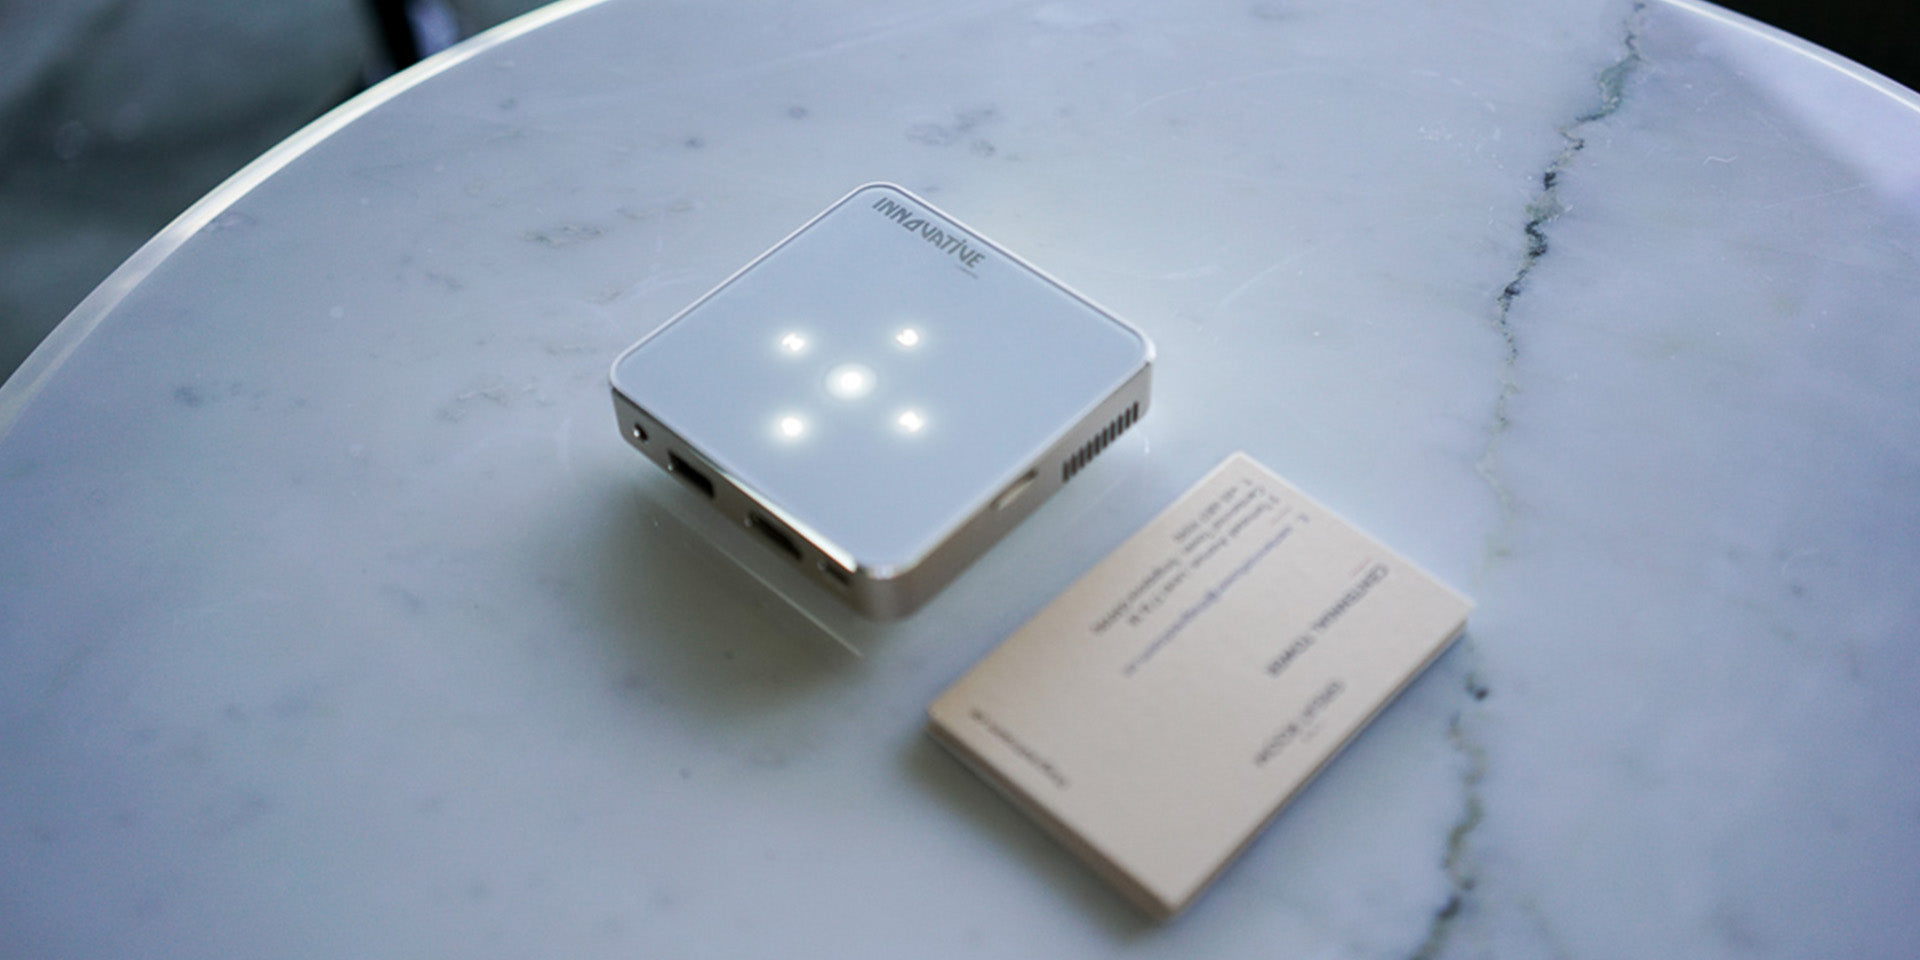 pocket-projector-smaller-as-business-card-size